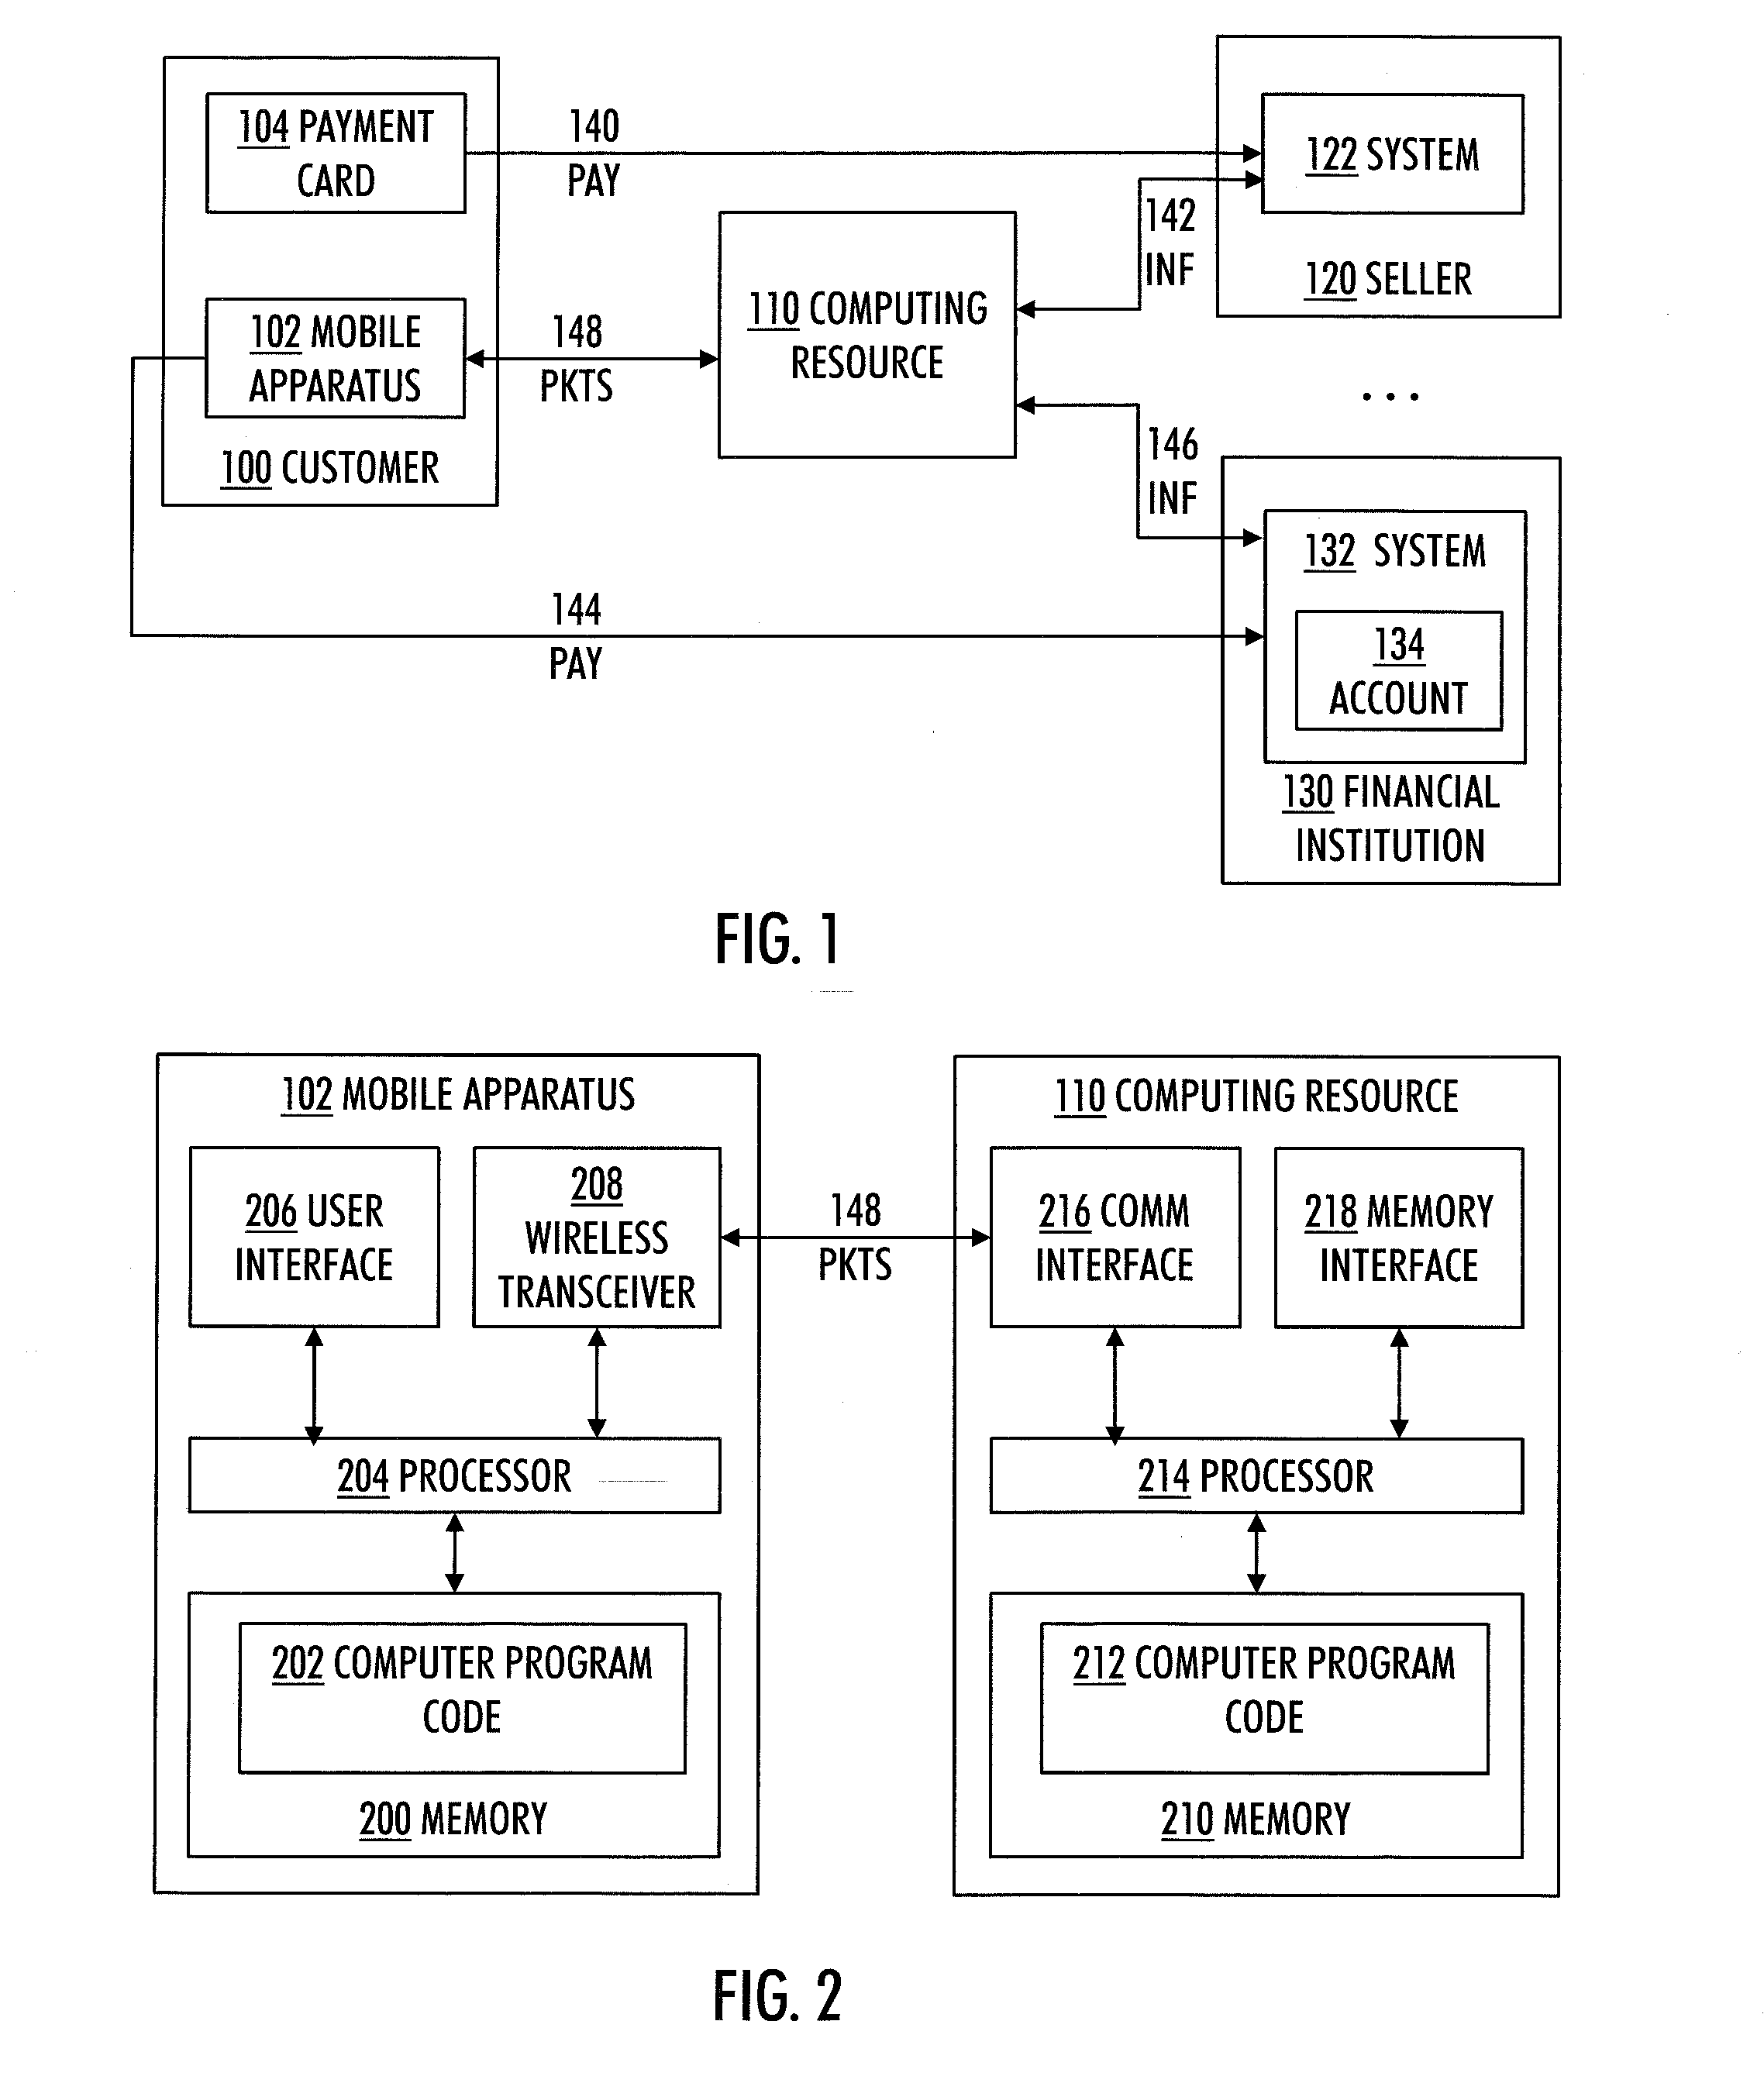 Mobile apparatus with transaction information